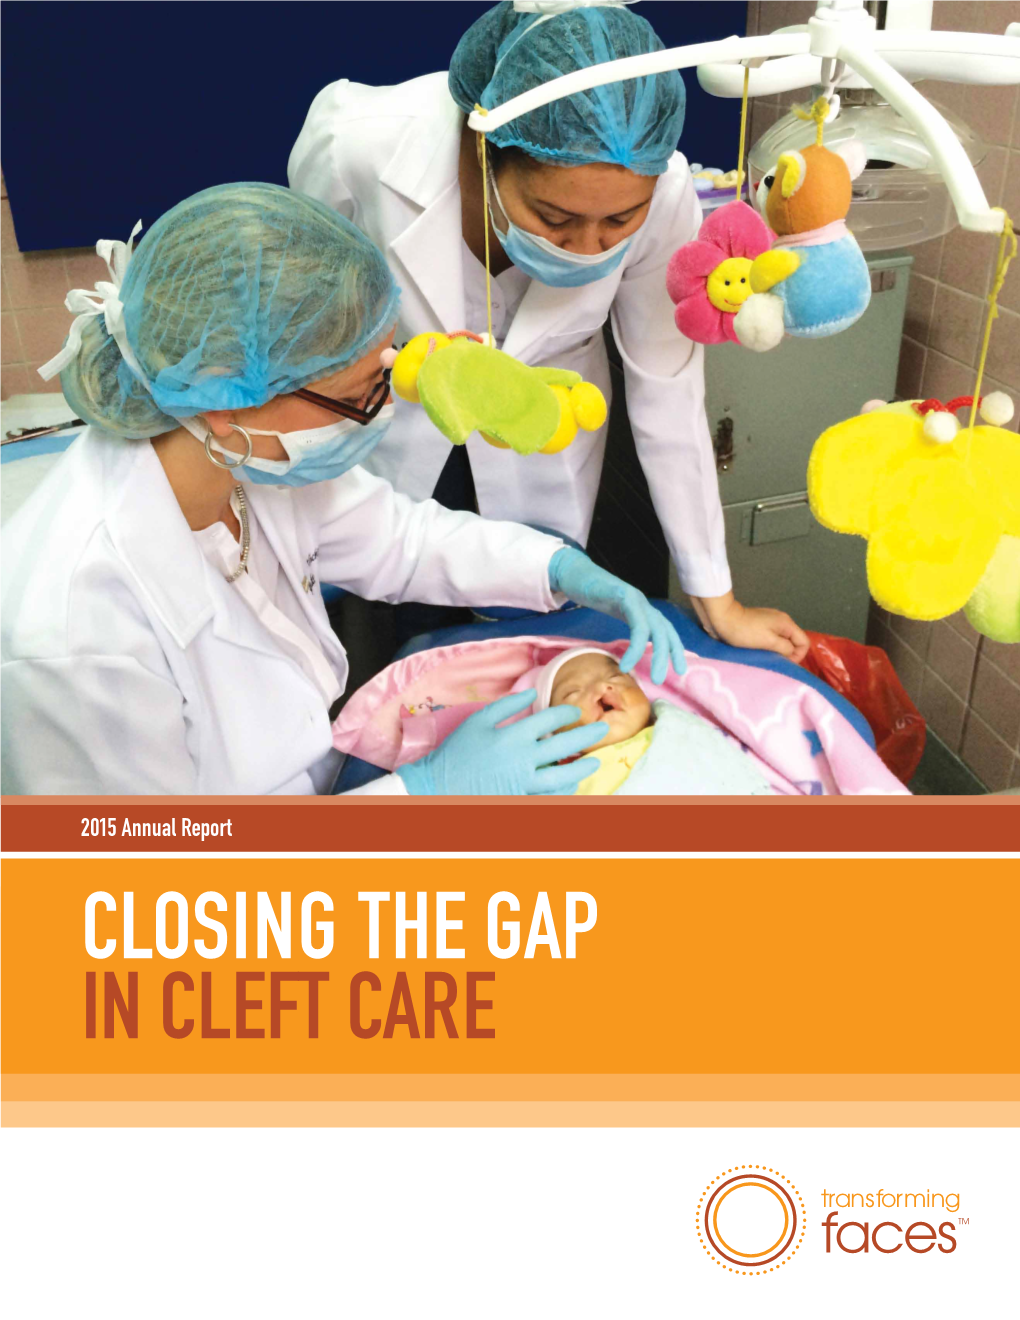 CLOSING the GAP in CLEFT CARE Vision Table of Contents Be a Multidisciplinary Cleft Care Resource for Hospitals, Associations and International Cleft Organizations